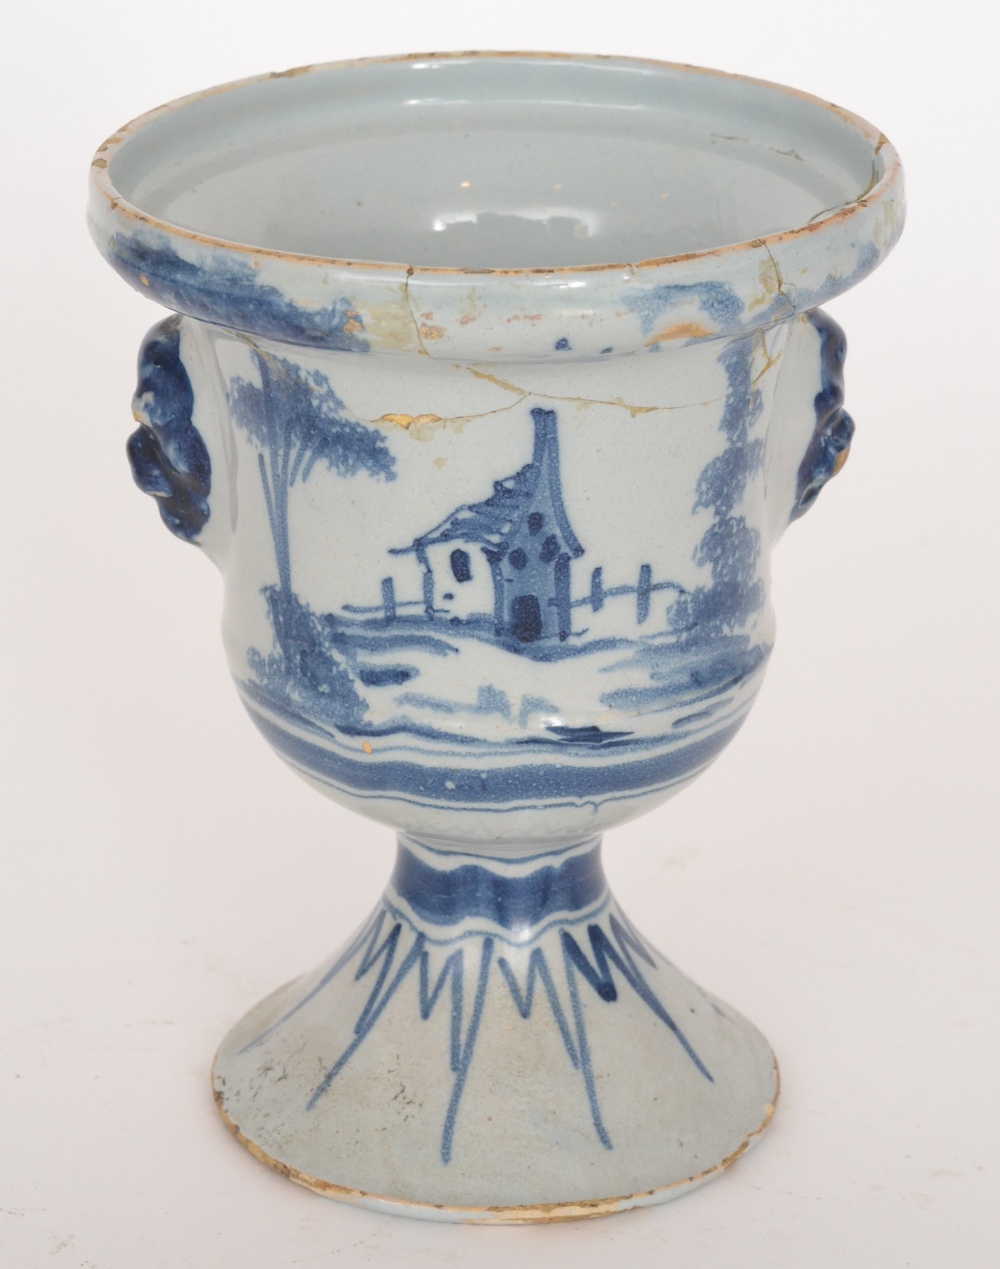 A late 19th Century Delft tin glazed urn or drug jar decorated with a blue and white church and